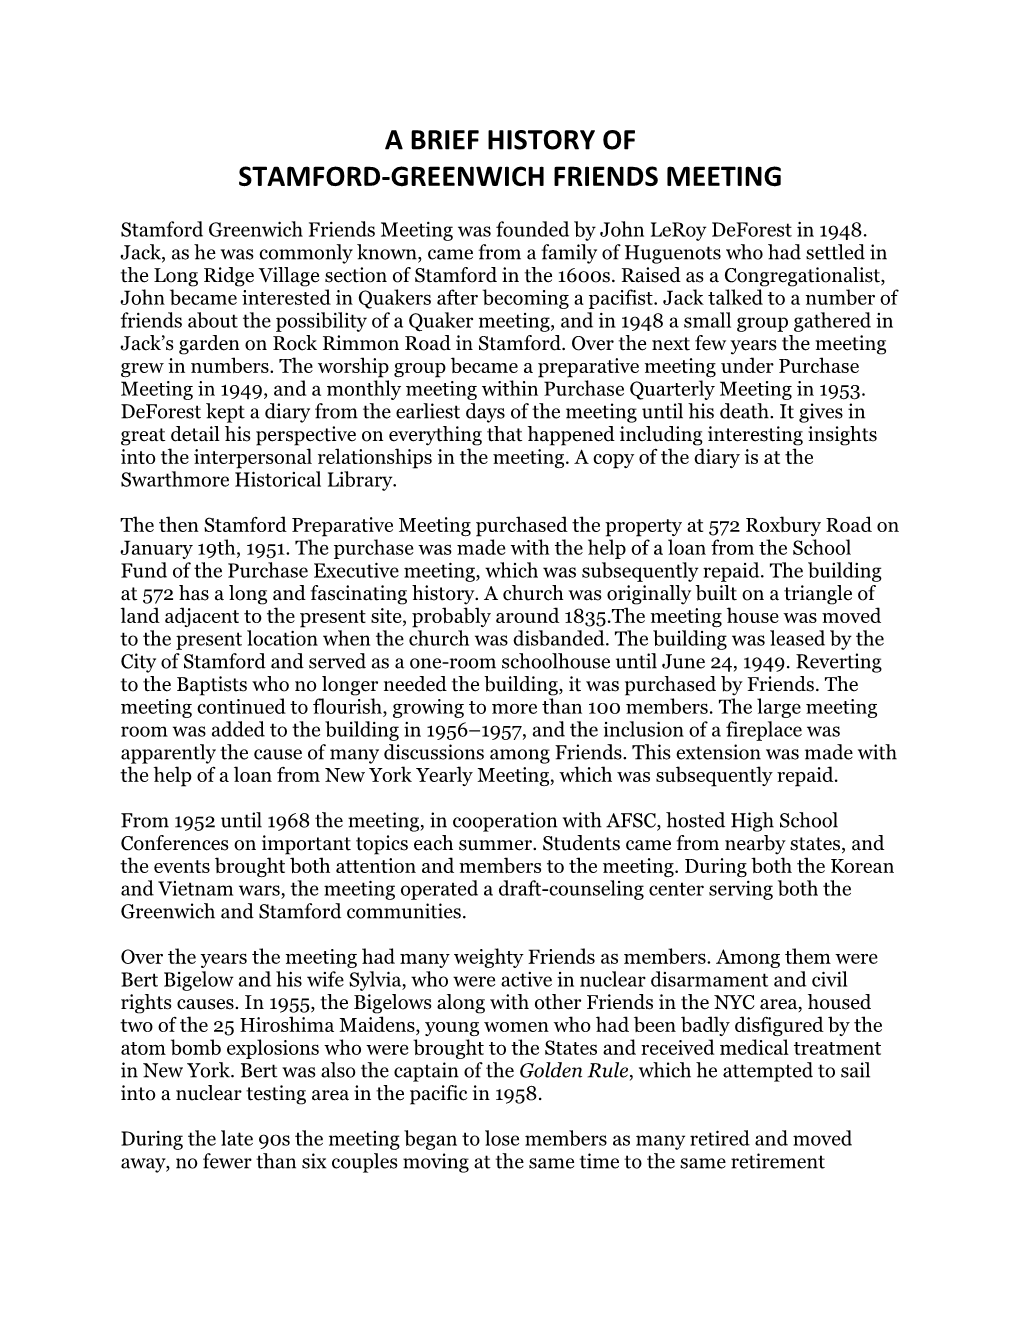 A Brief History of Stamford-Greenwich Friends Meeting